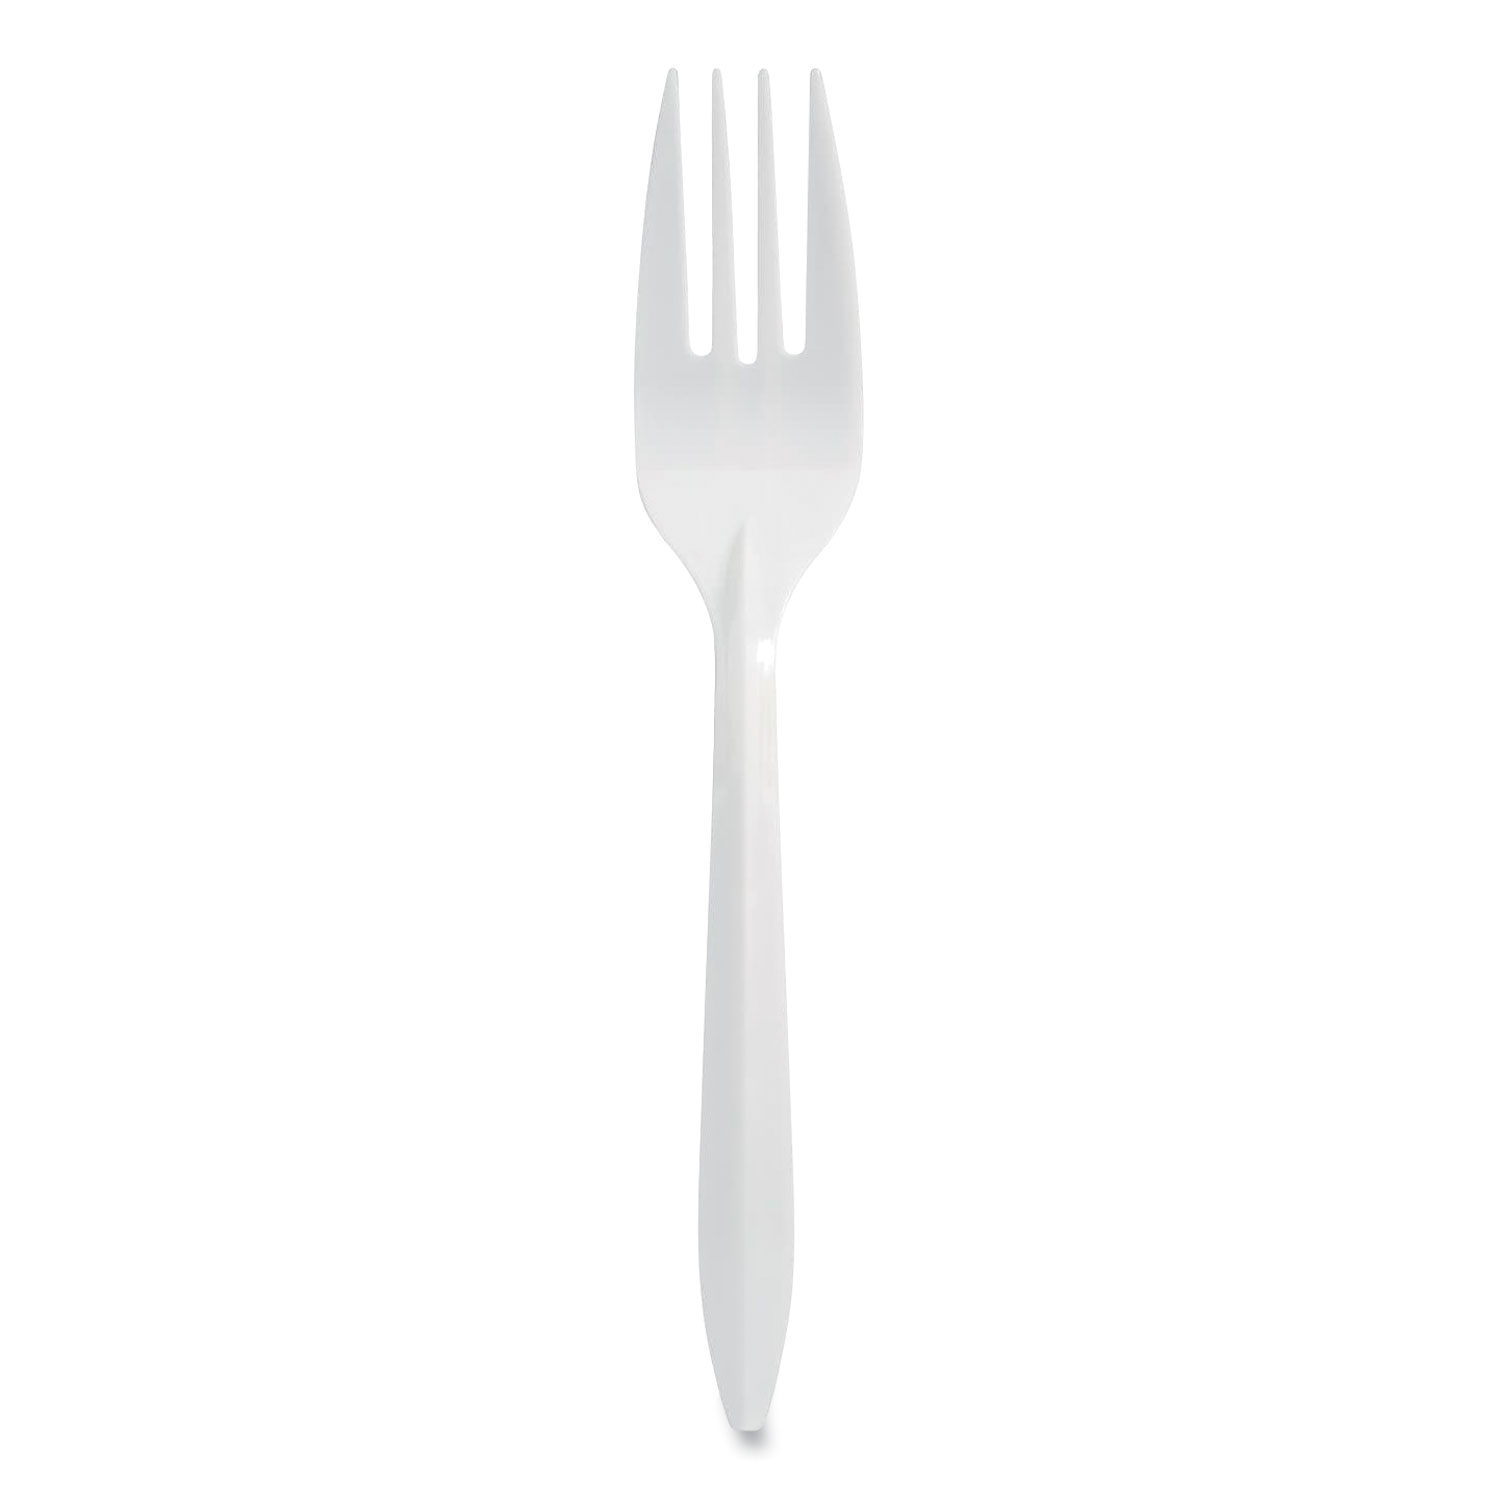  Berkley Square 1102000 Individually Wrapped Mediumweight Cutlery, Forks, White, 1,000/Carton (BSQ886782) 